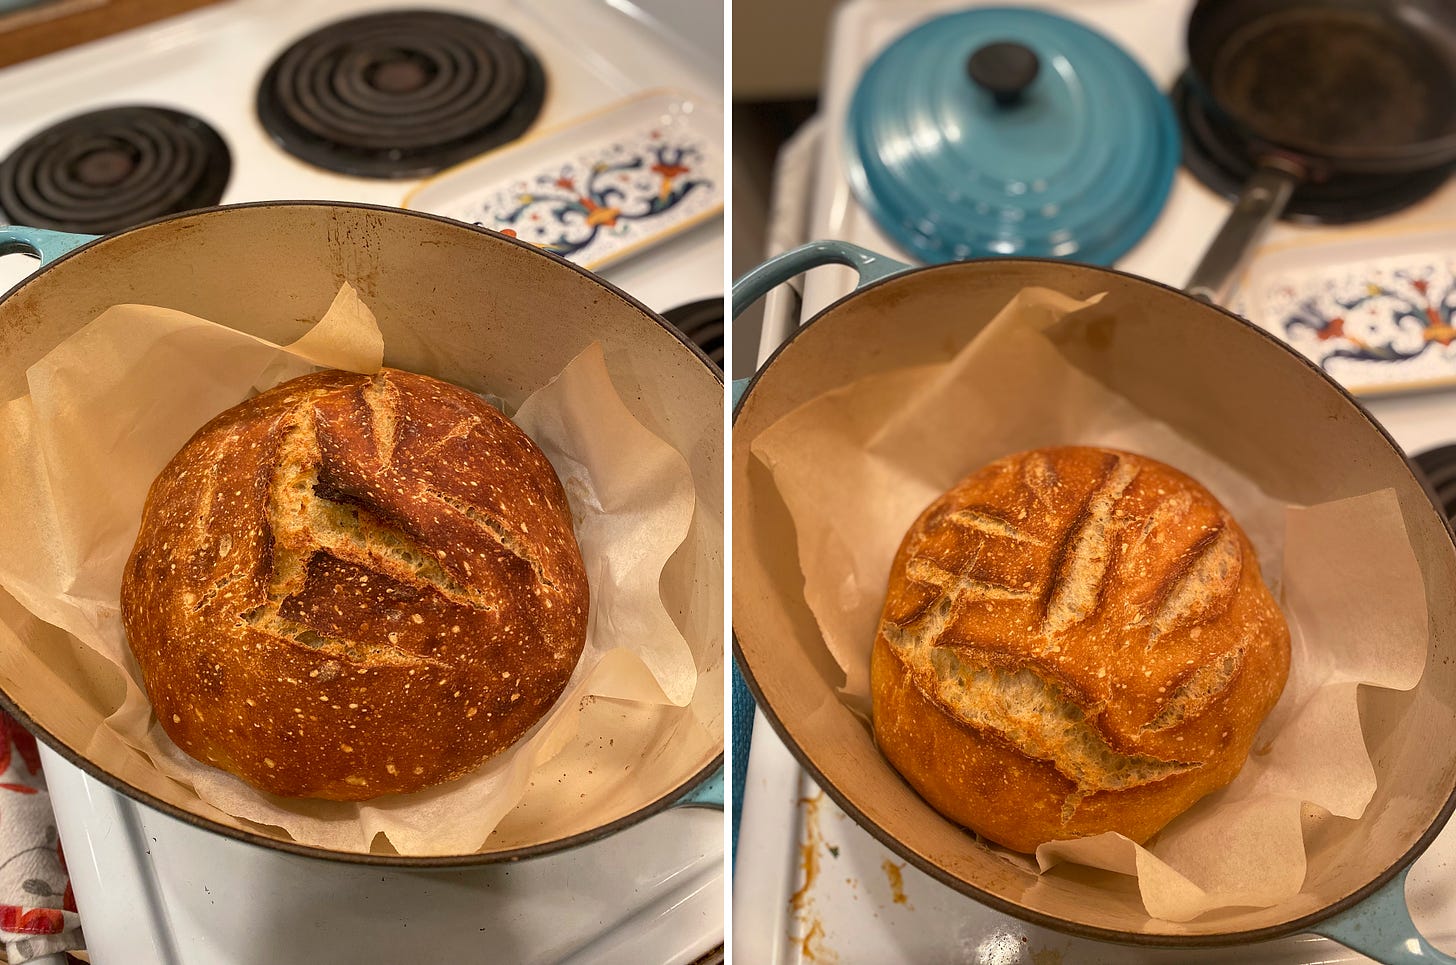 two images side by side, each of a sourdough boule inside a dutch oven lined with parchment. The loaf on the left is slightly darker, and the loaf on the right has more uneven scoring.